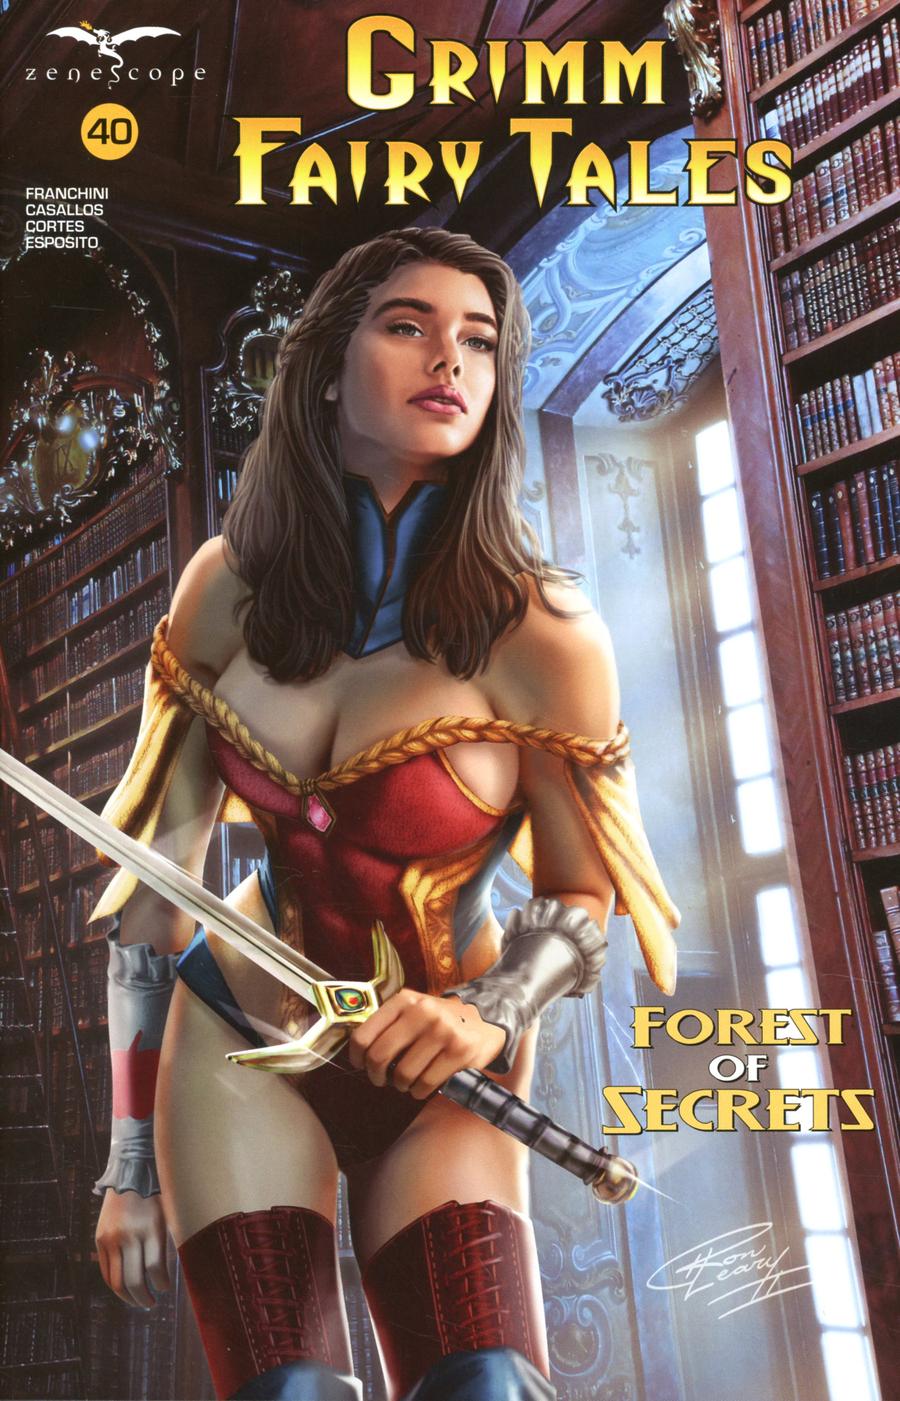 Grimm Fairy Tales Vol 2 #40 Cover C Ron Leary Jr